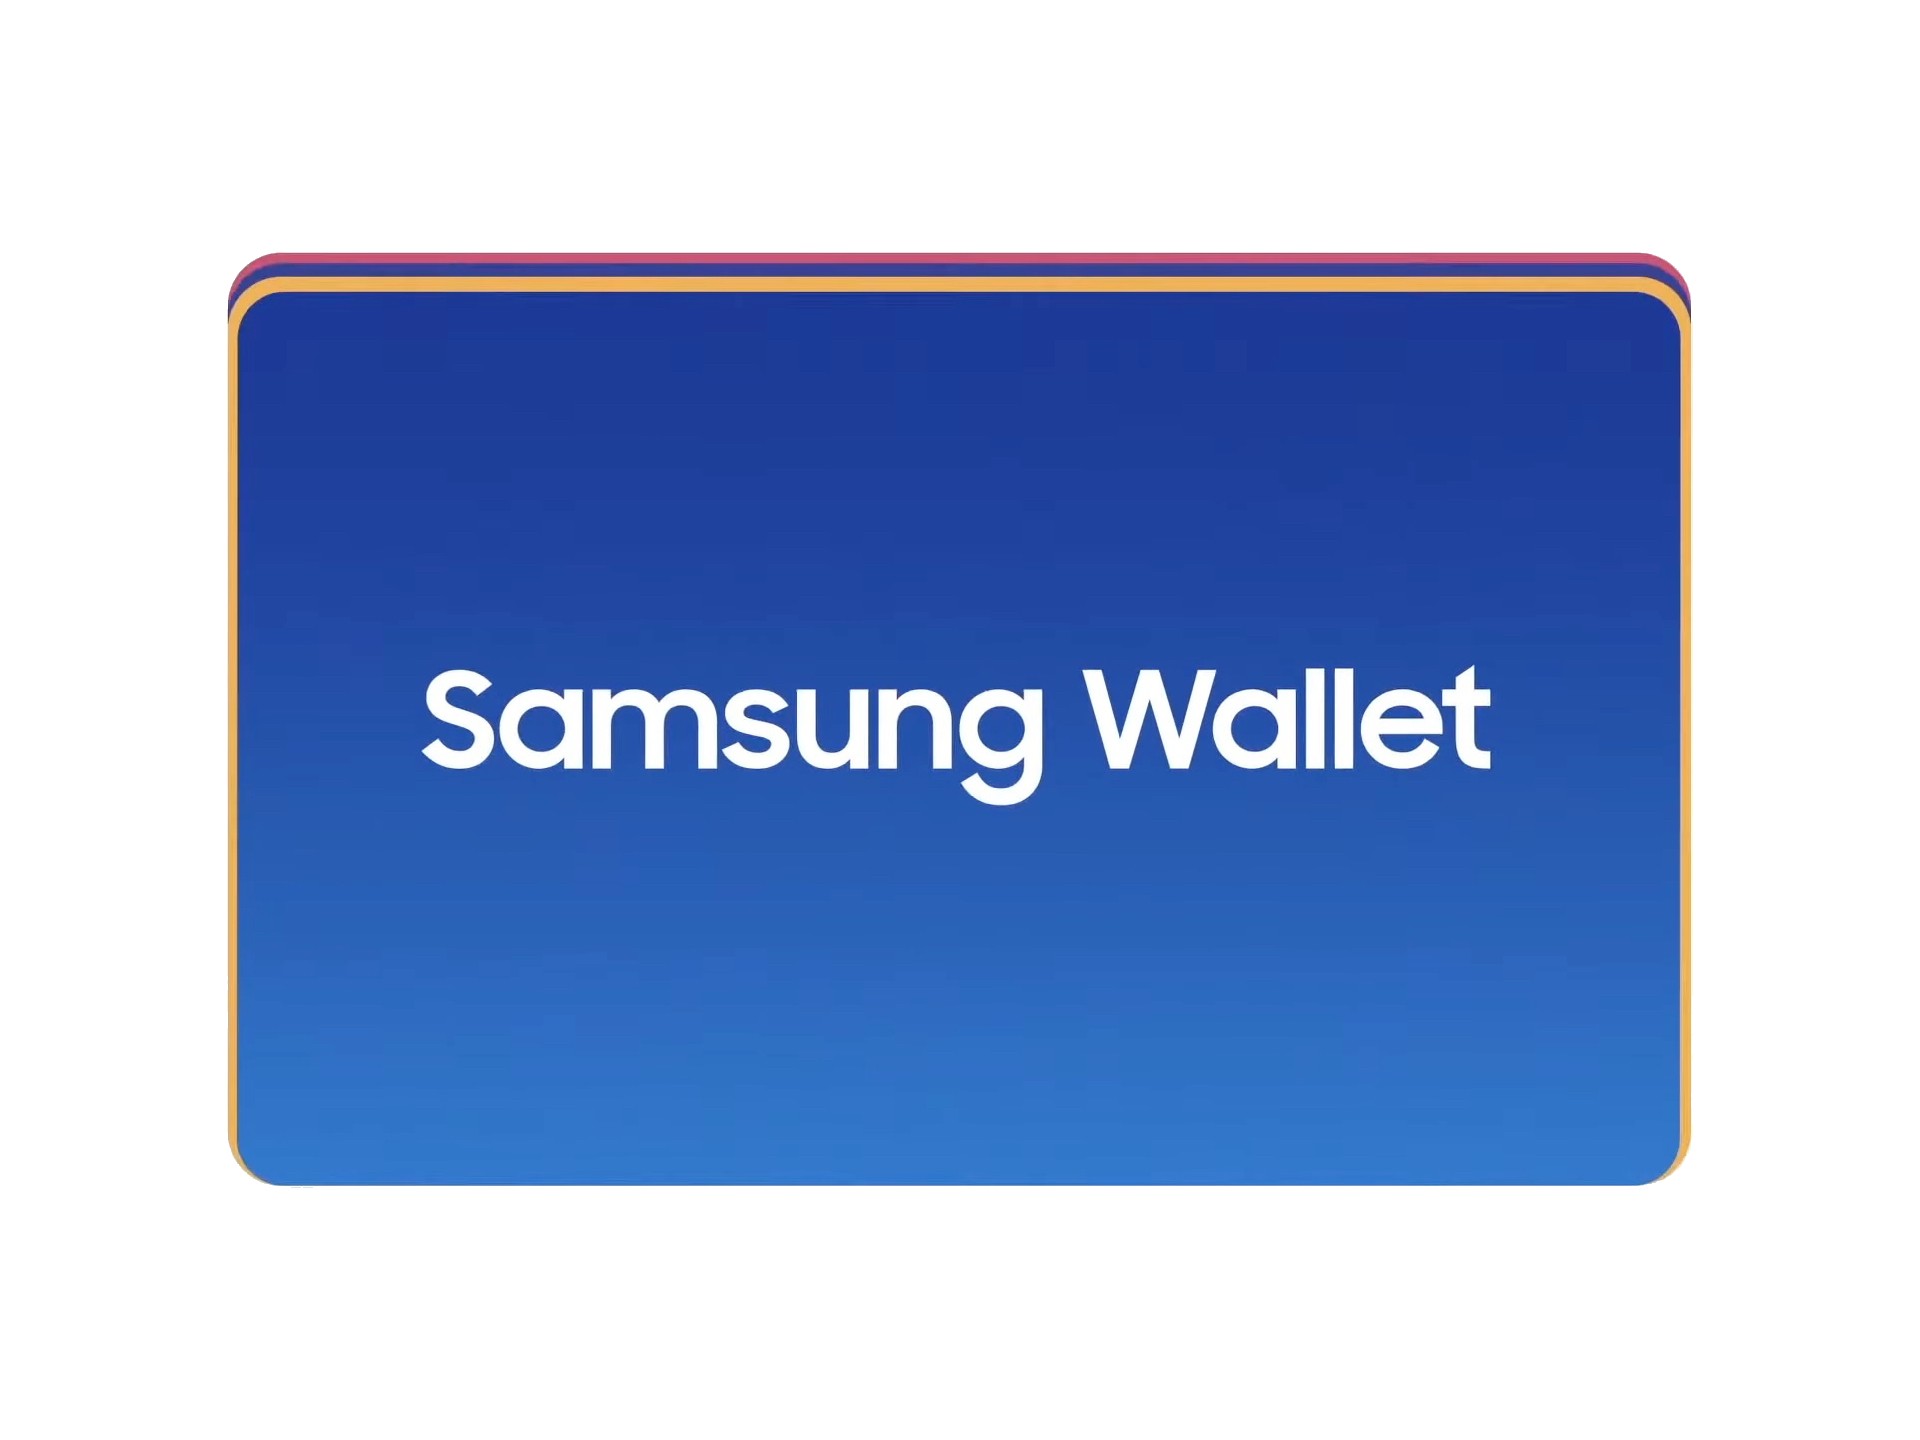 Samsung Wallet will change the way you use your Galaxy smartphone